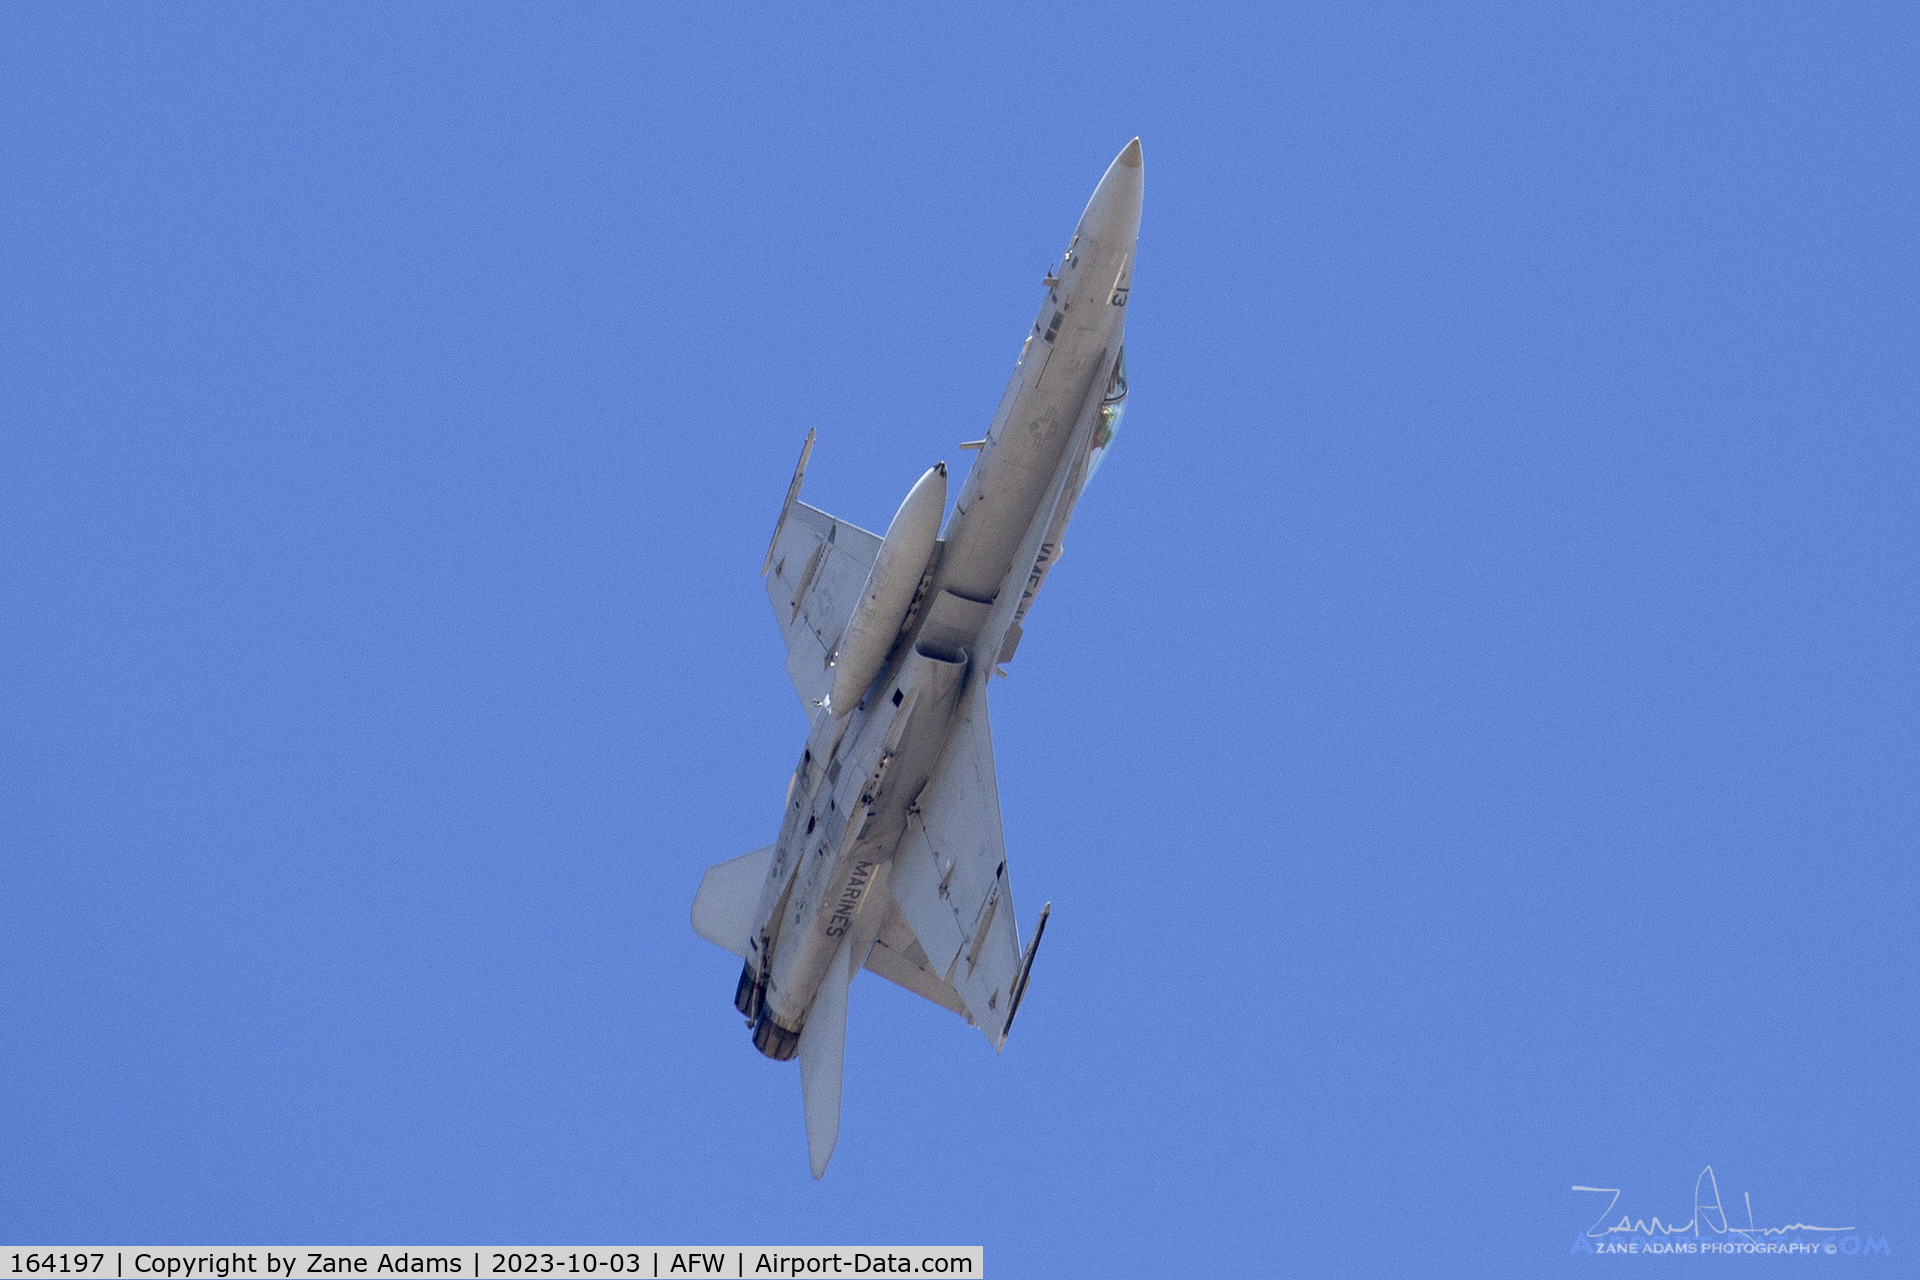 164197, 1990 McDonnell Douglas F/A-18C Hornet C/N 0960/C192, VFMA-112 F/A-18C+ overhead at Perot Field, Fort Worth, TX